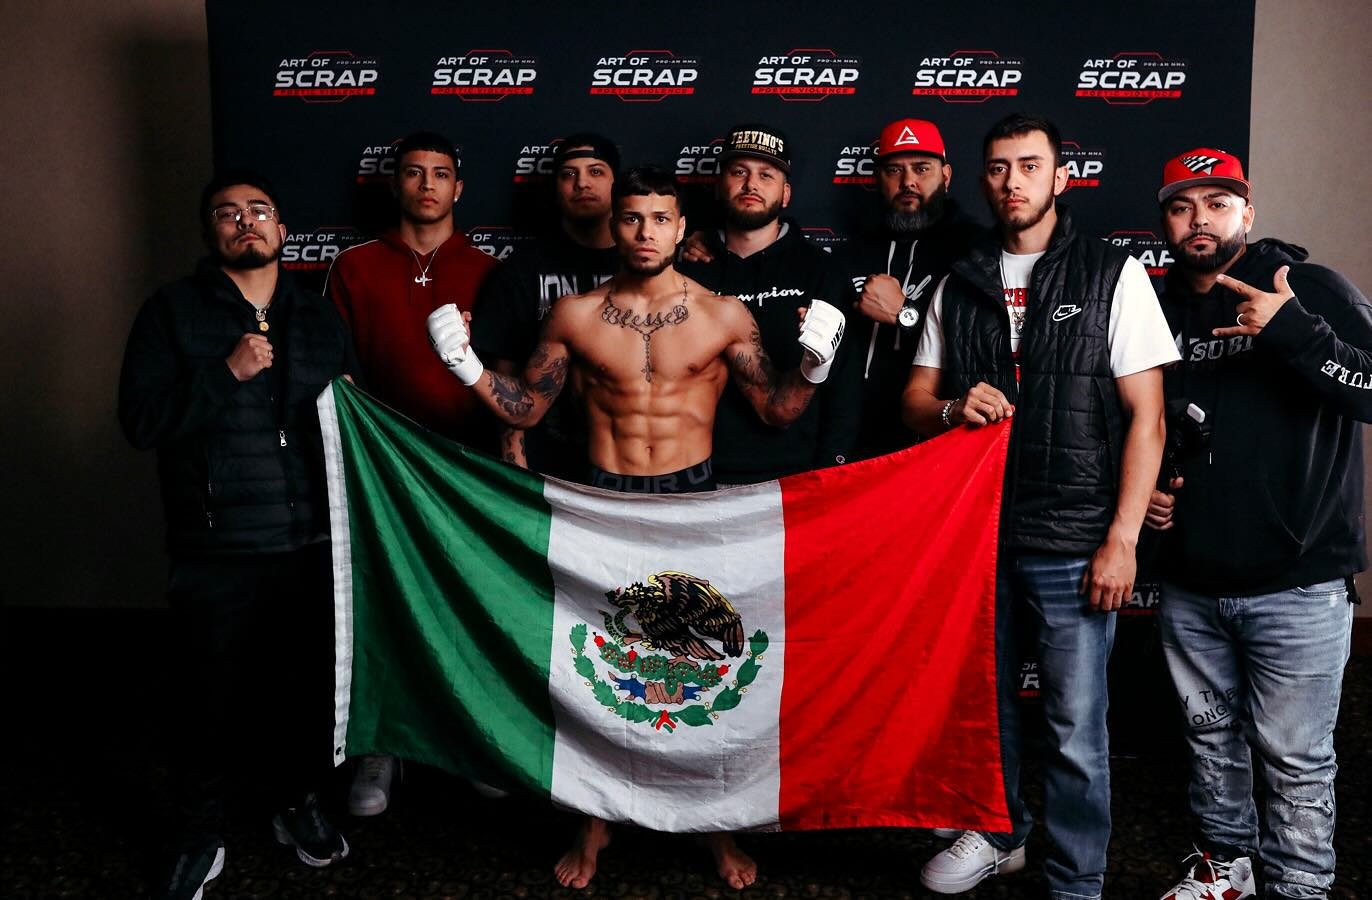 @lorenzo_trevino at AOS8 media day 🇲🇽 ⚔️ 
AOS8 goes down tomorrow night at the Memorial Coliseum in Fort Wayne, Indiana! Tickets and PPV are available at artofscrap.com ⚡️⚡️